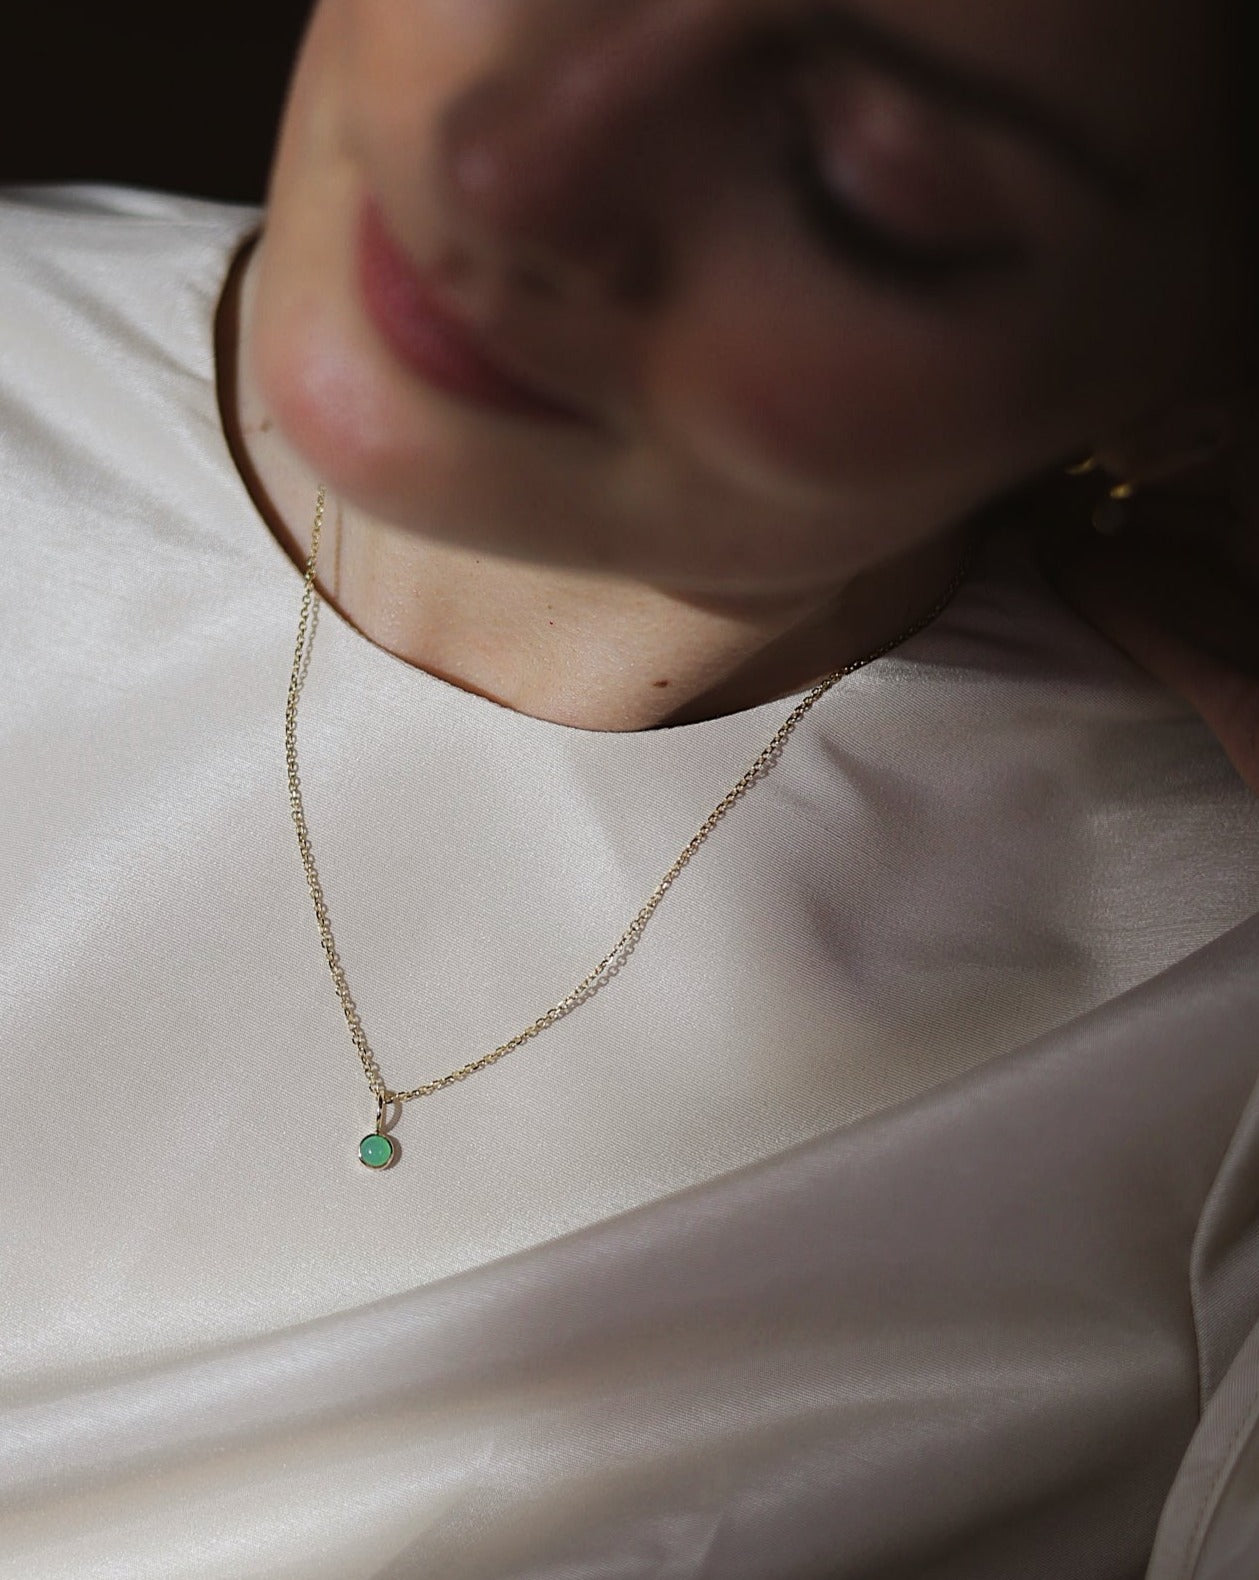 women wearing a dainty gold chain with a chrysoprase charm pendant 